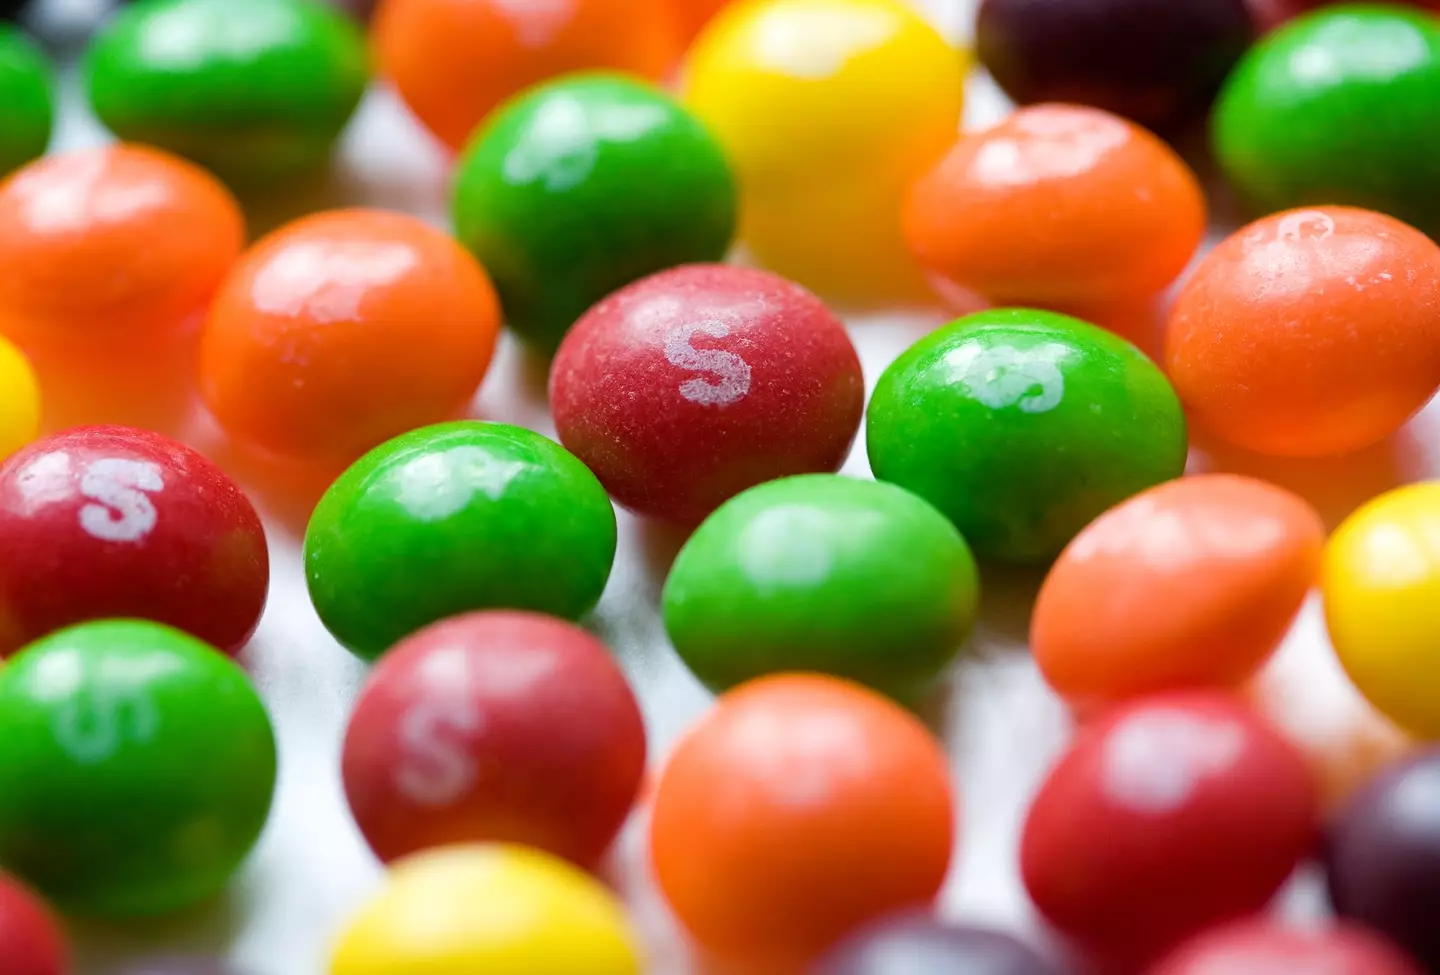 The lawsuit claims the sweets aren't safe to eat.